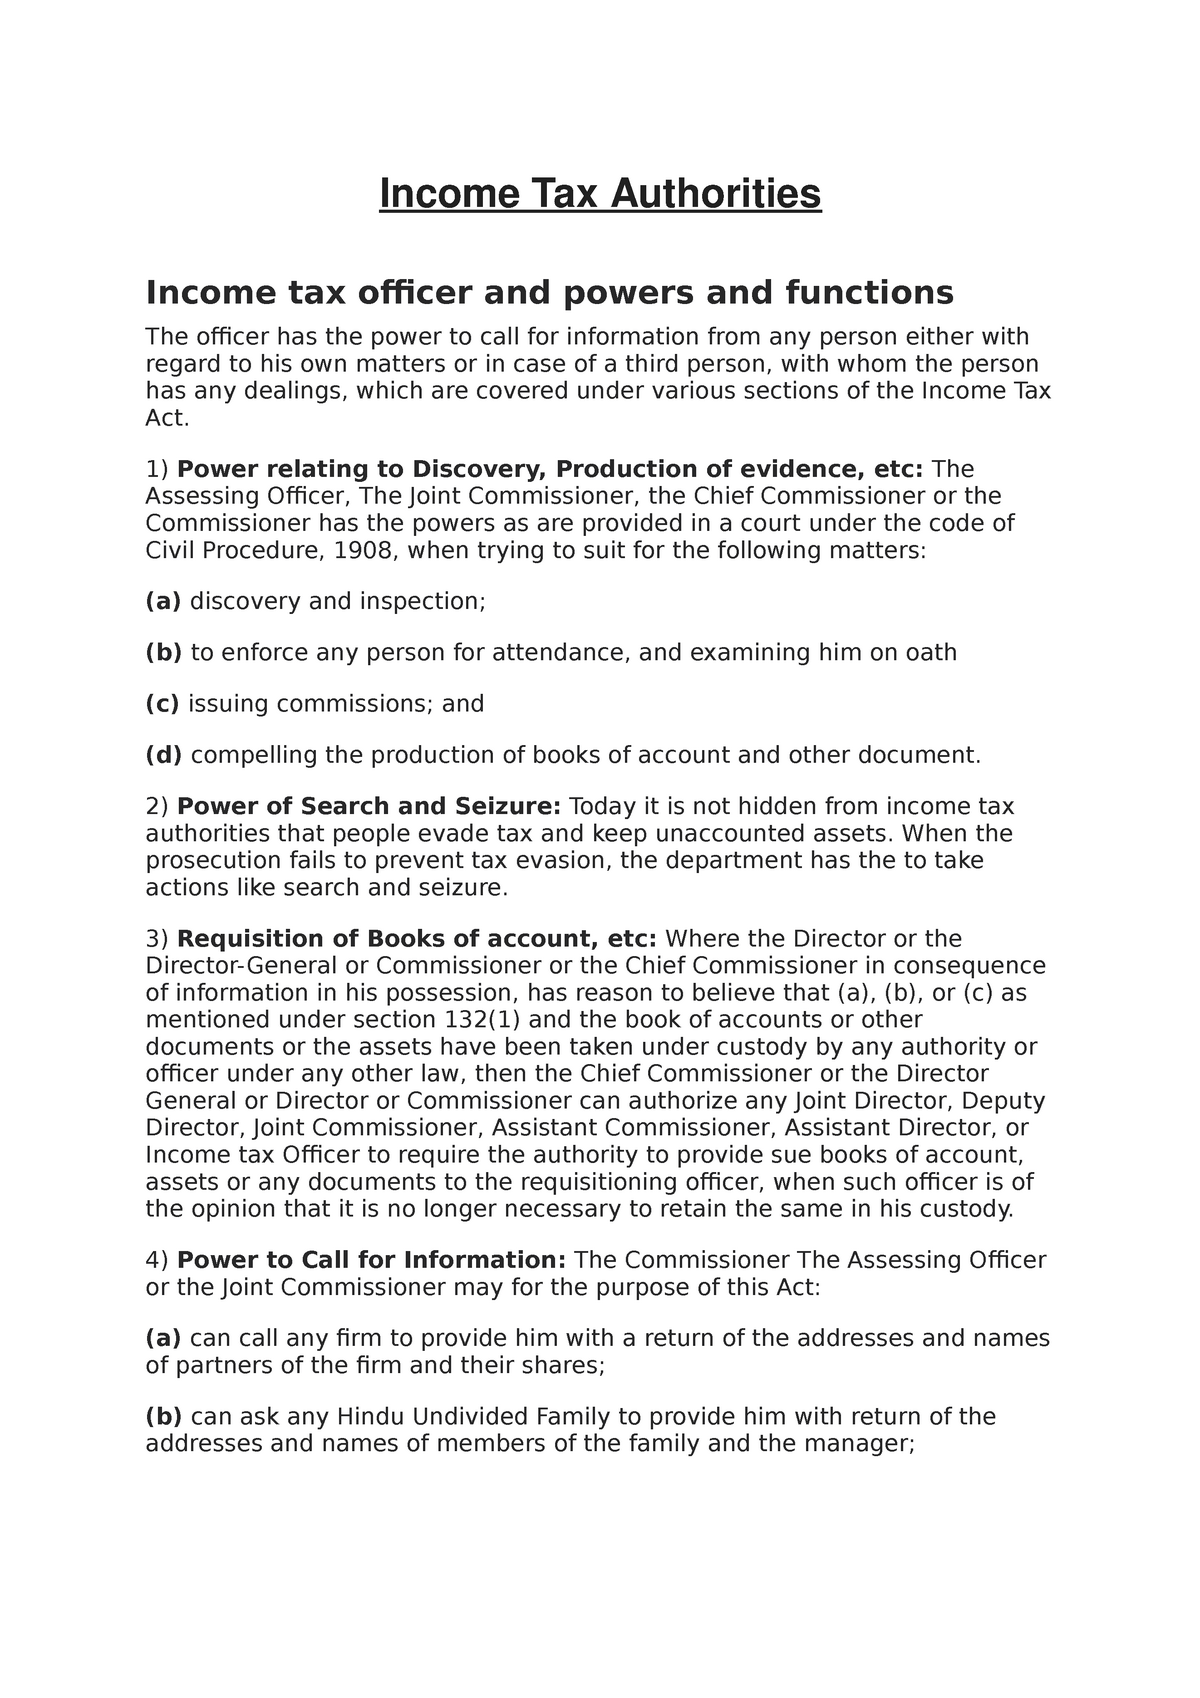 income tax authorities essay